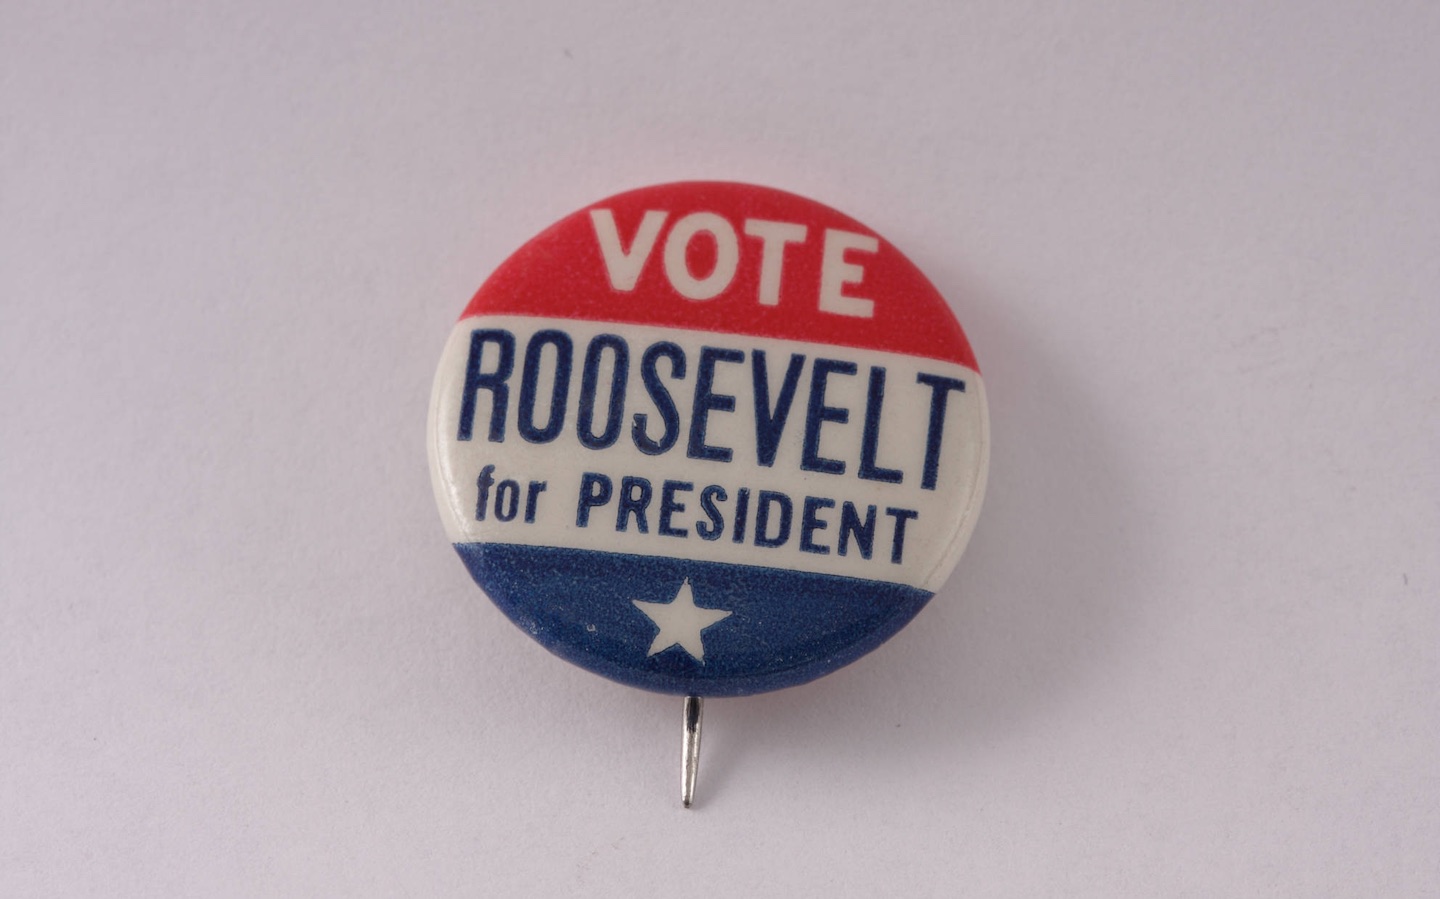 Red, white and blue pin with the words "Vote Roosevelt for President